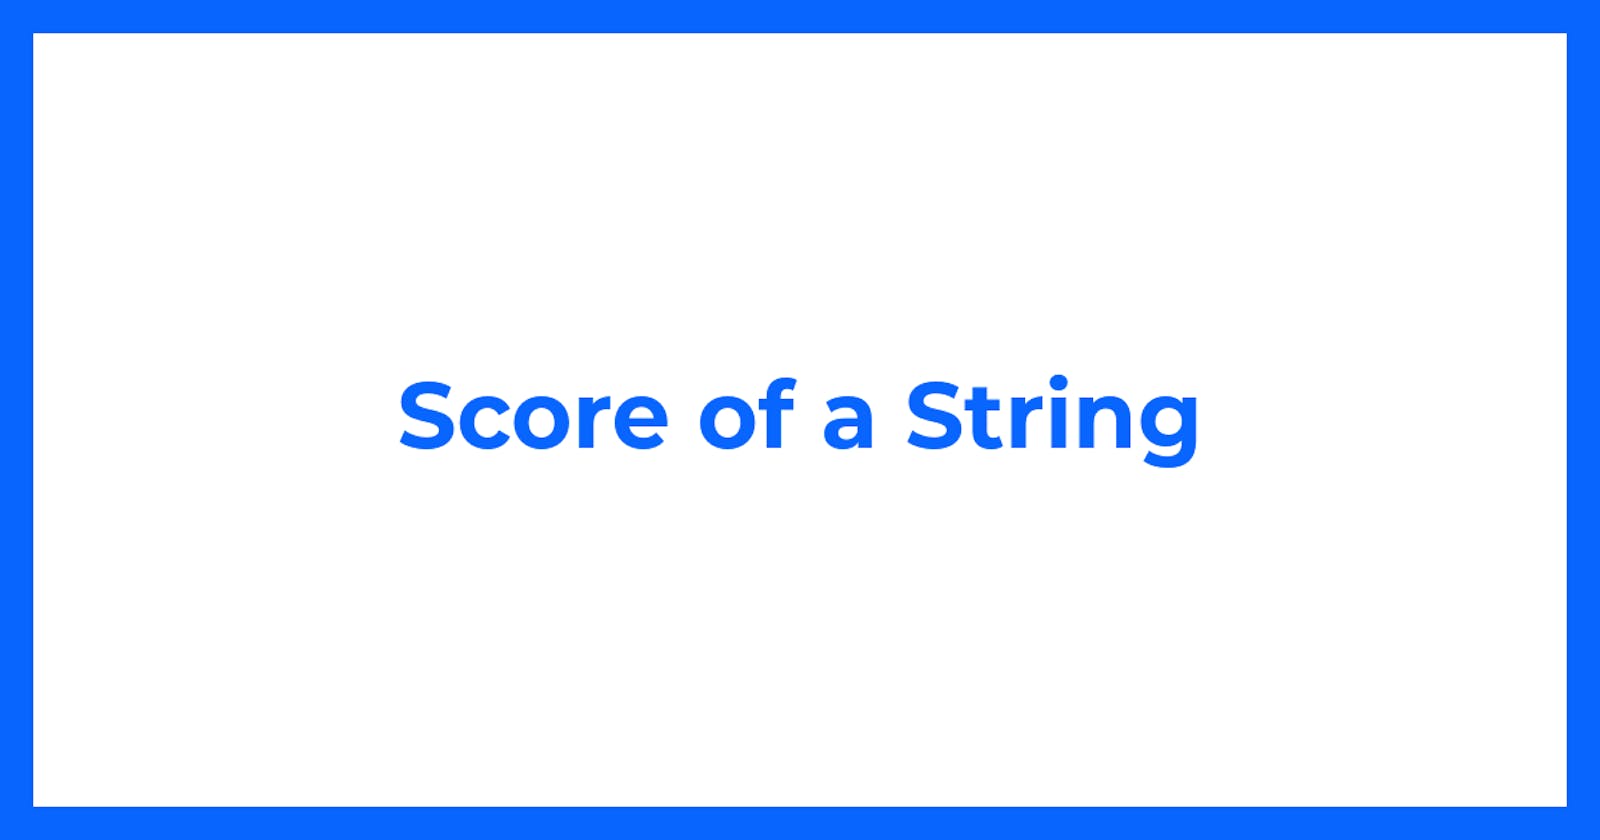 Score of a String